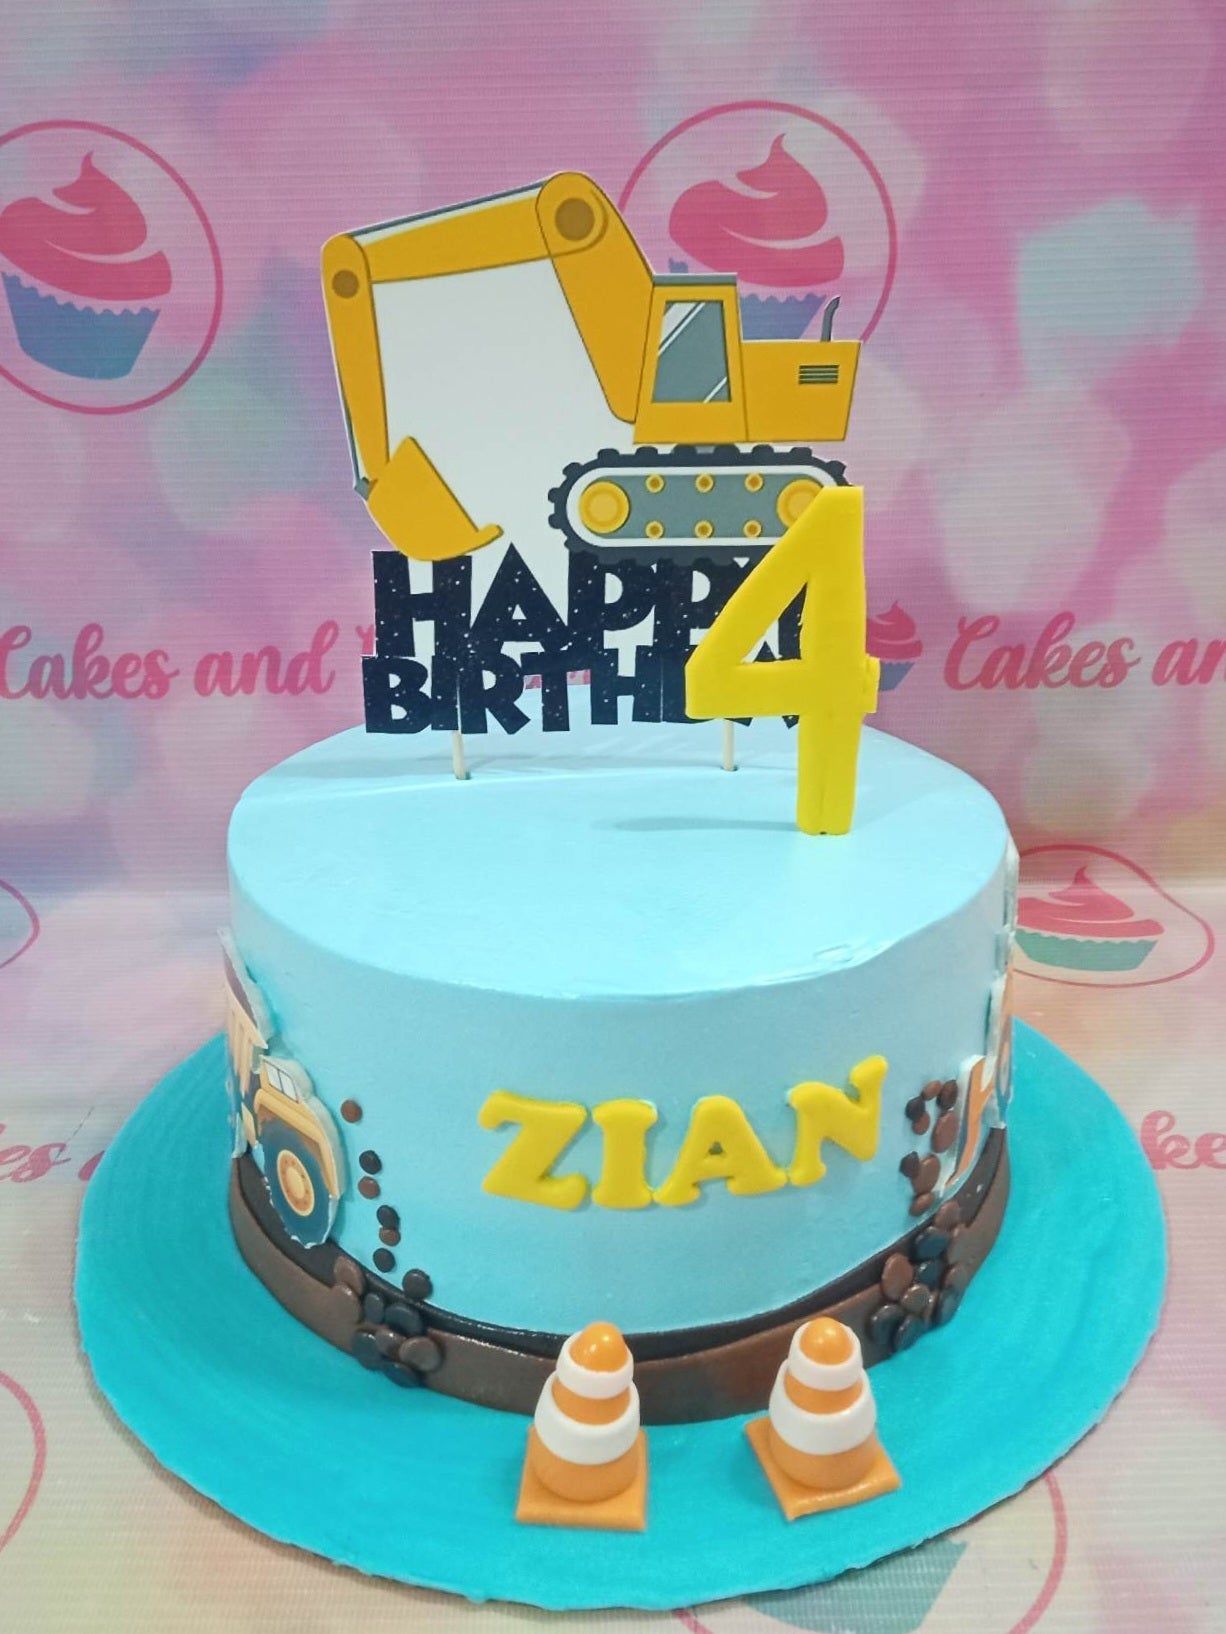 This Construction Cake is perfect for the young builder-to-be in your life. Featuring an Excavator and Backhoe on the outside and little buildable toys inside, this Customized Cake is sure to be a hit at their Birthday party. Made with the highest quality, your little one will love this truck-themed cake!